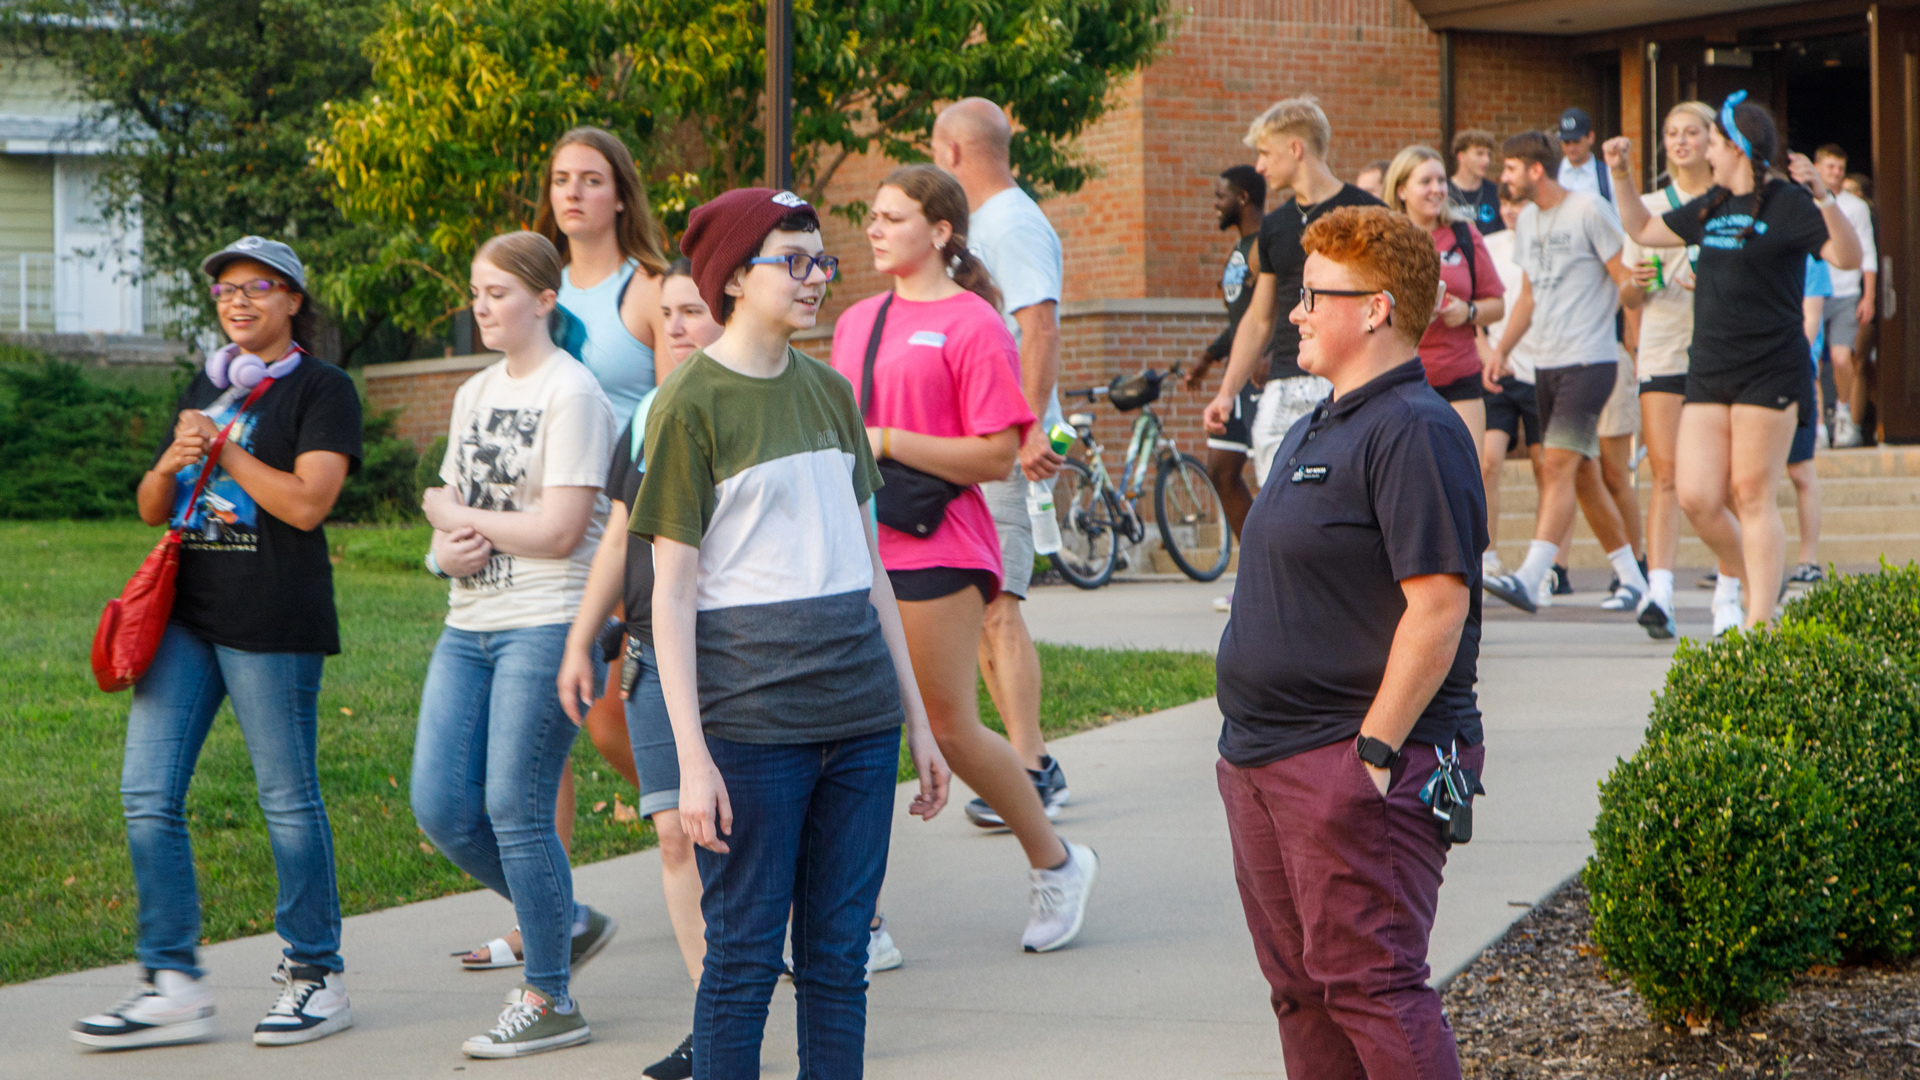 Grace students walking around on campus.